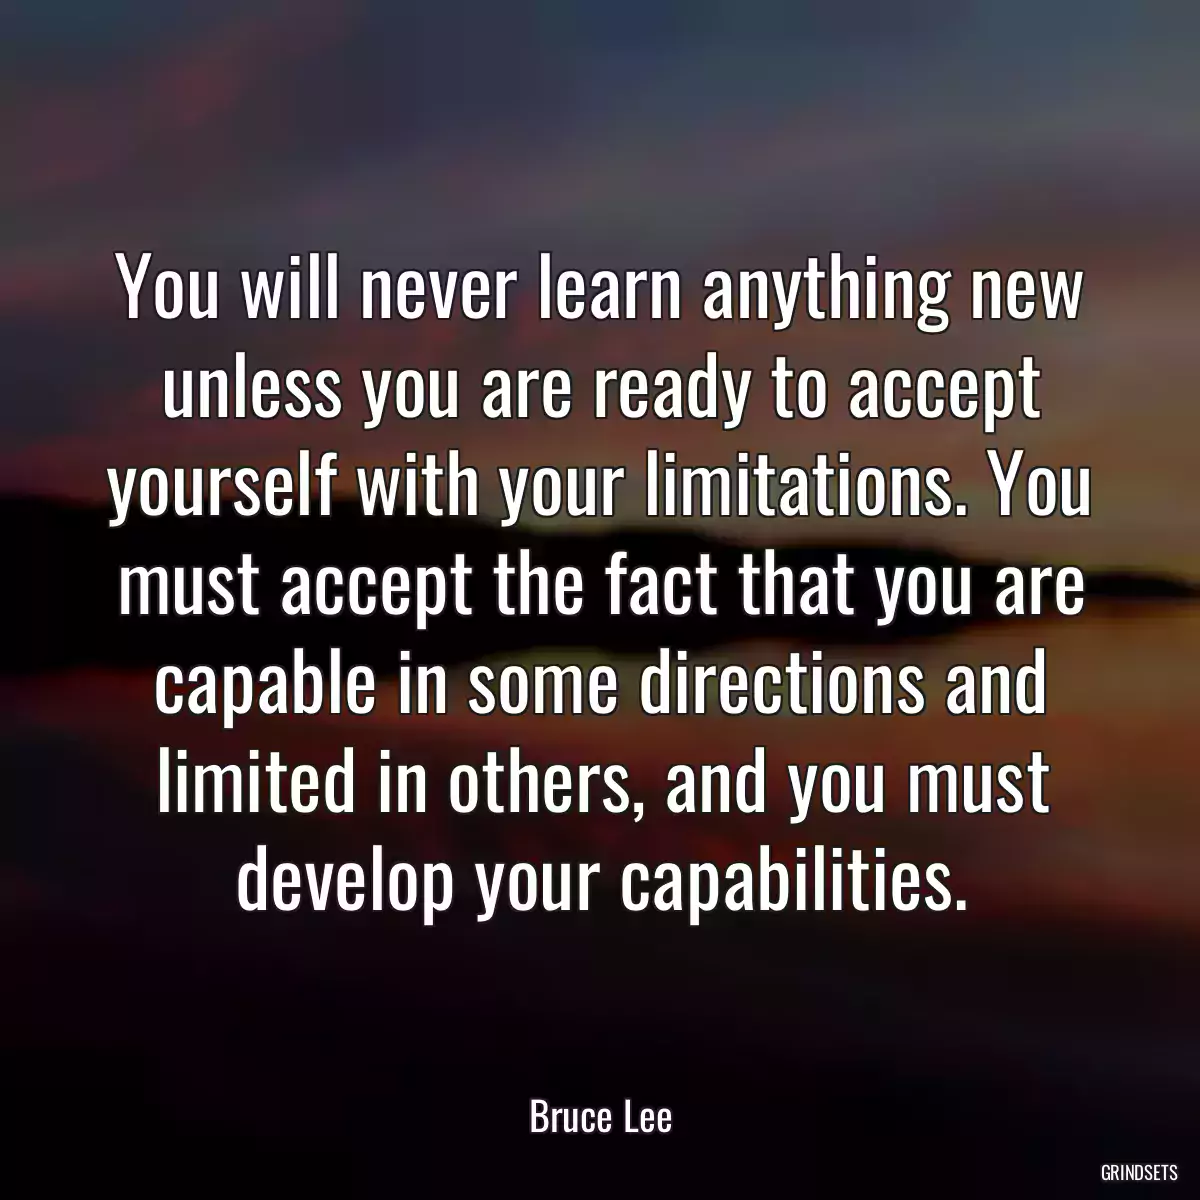 You will never learn anything new unless you are ready to accept yourself with your limitations. You must accept the fact that you are capable in some directions and limited in others, and you must develop your capabilities.